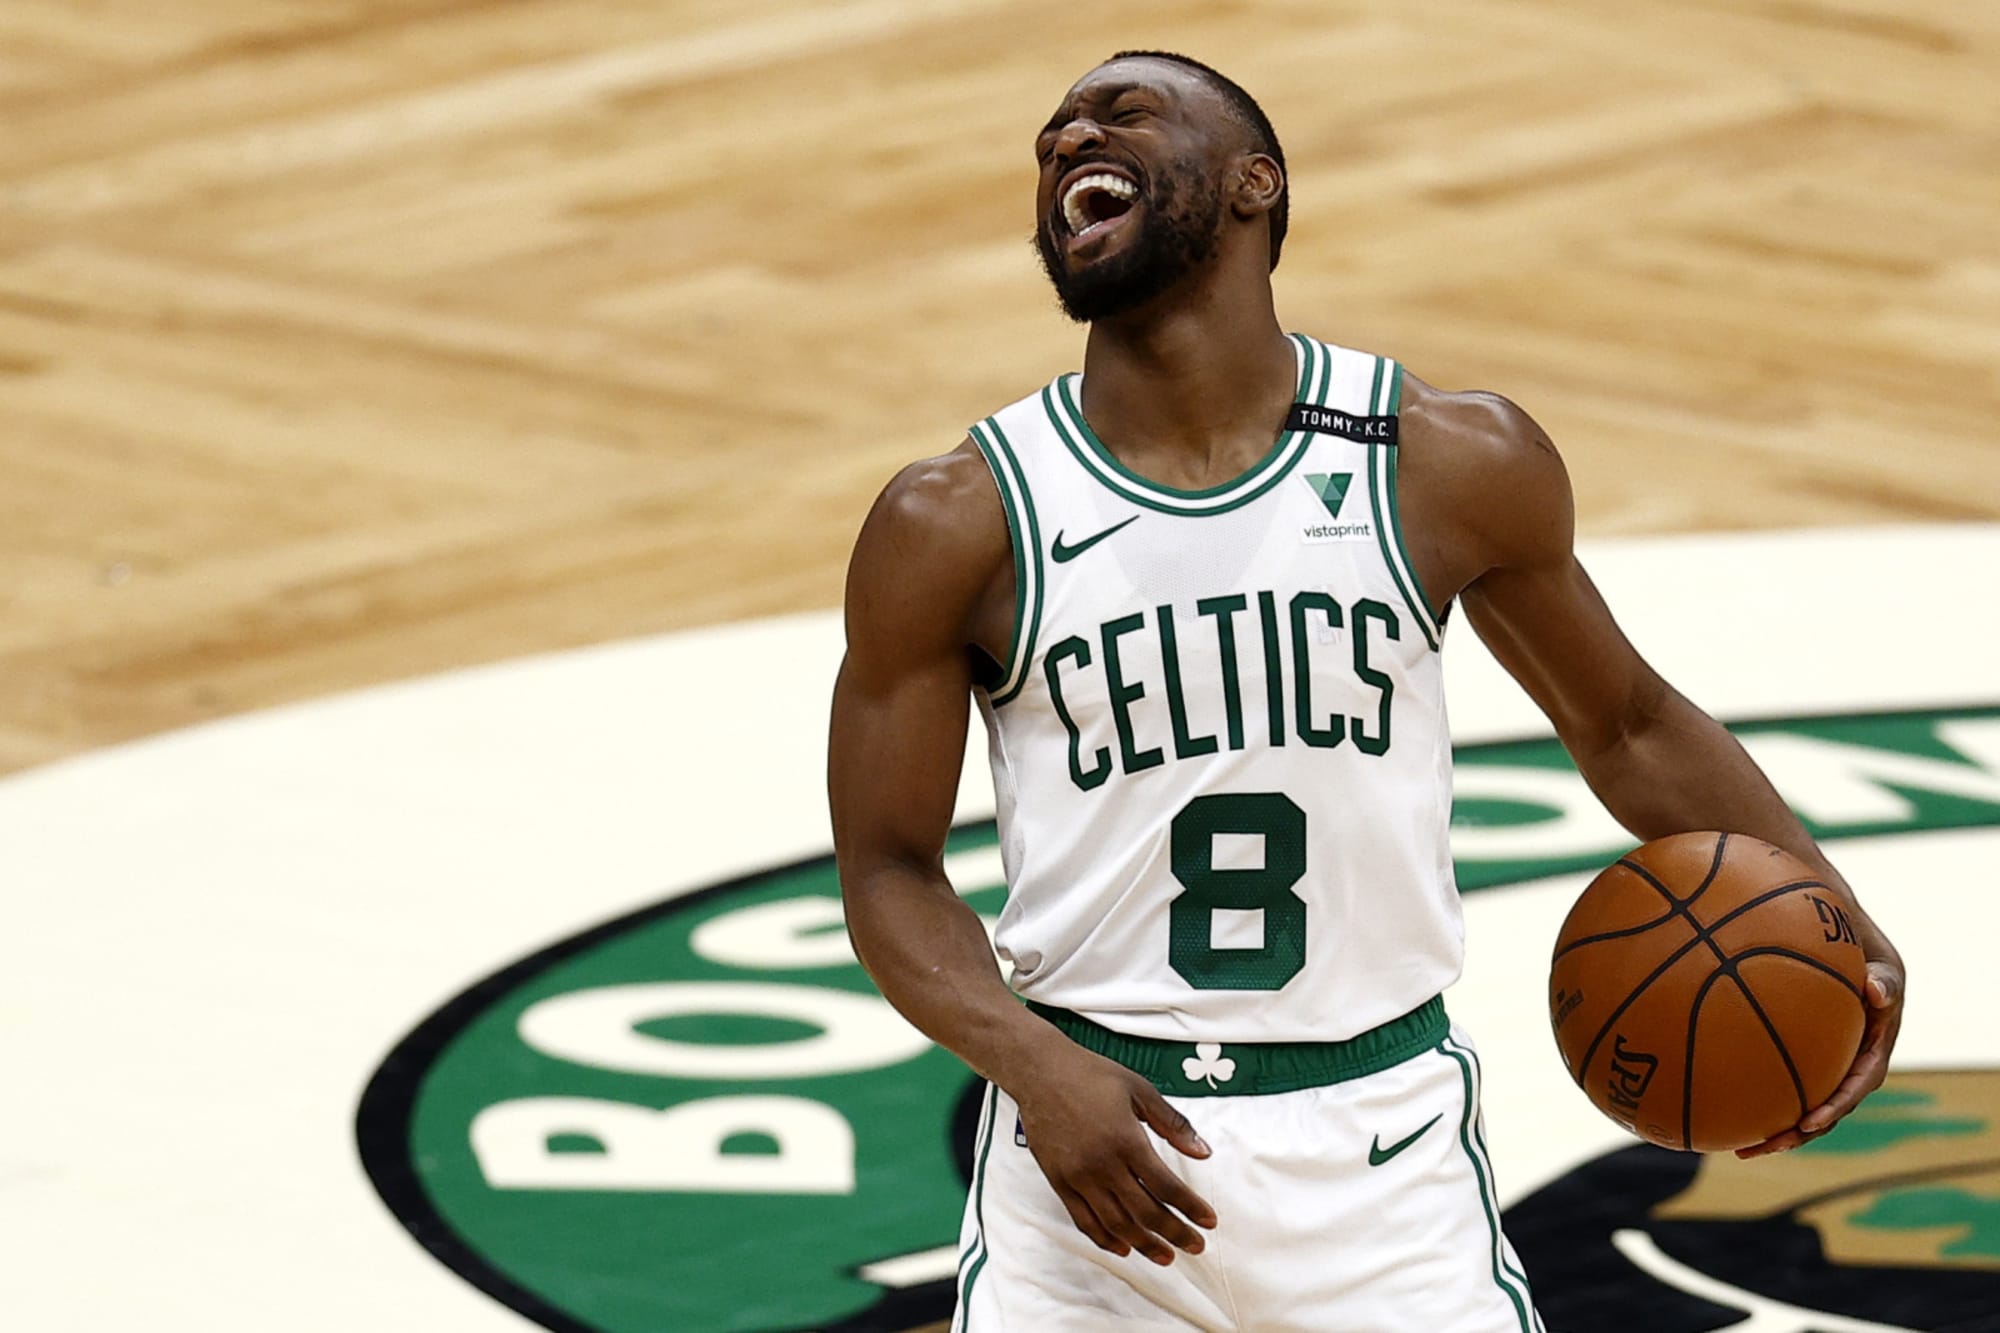 Kemba Walker intends to sign with Boston Celtics: reports